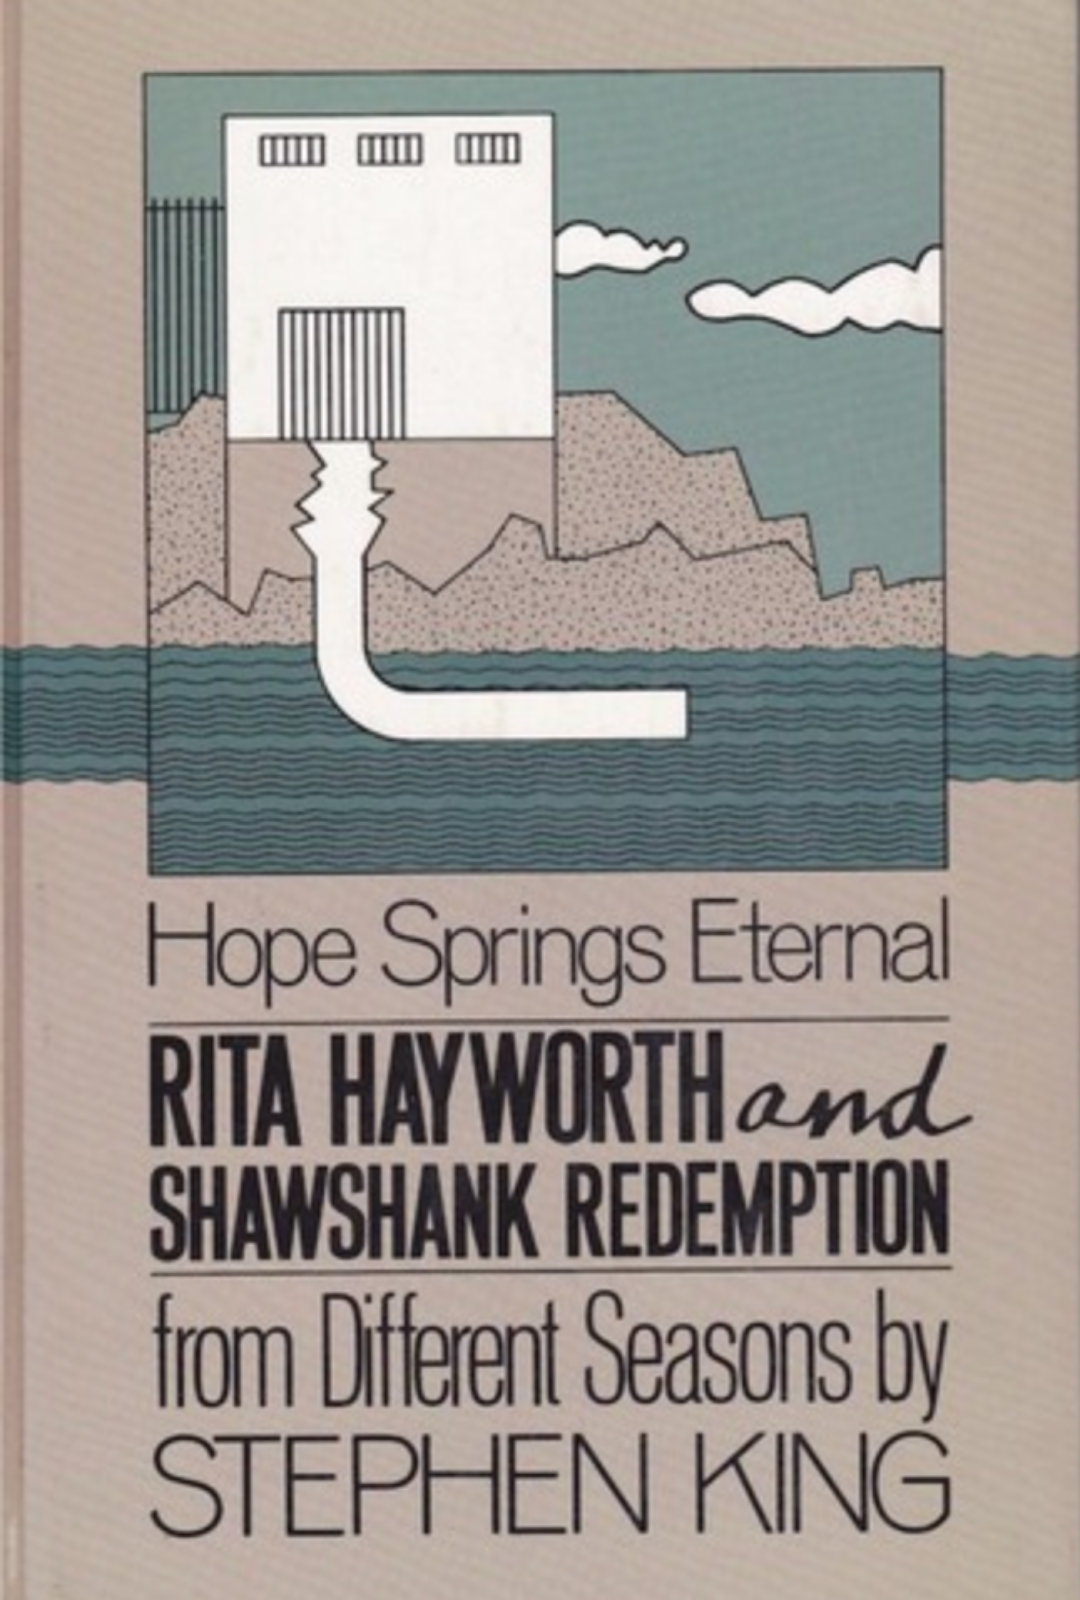 Shawshank-Redemption-book-cover-1080-1600.png